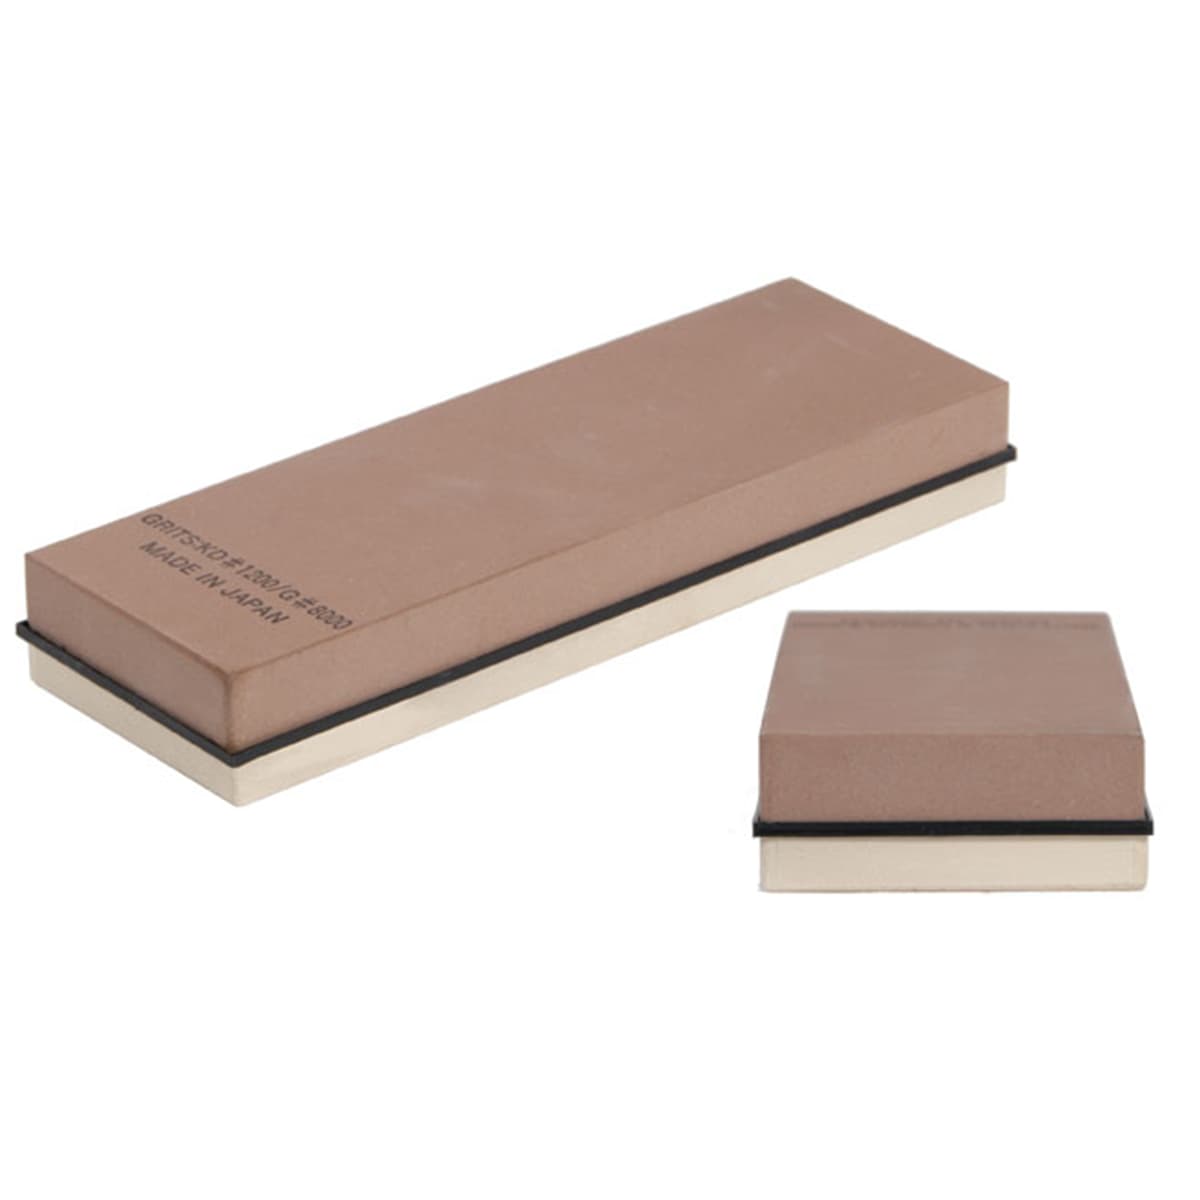 King Combination Japanese Waterstone - 1200 / 8000 Grit